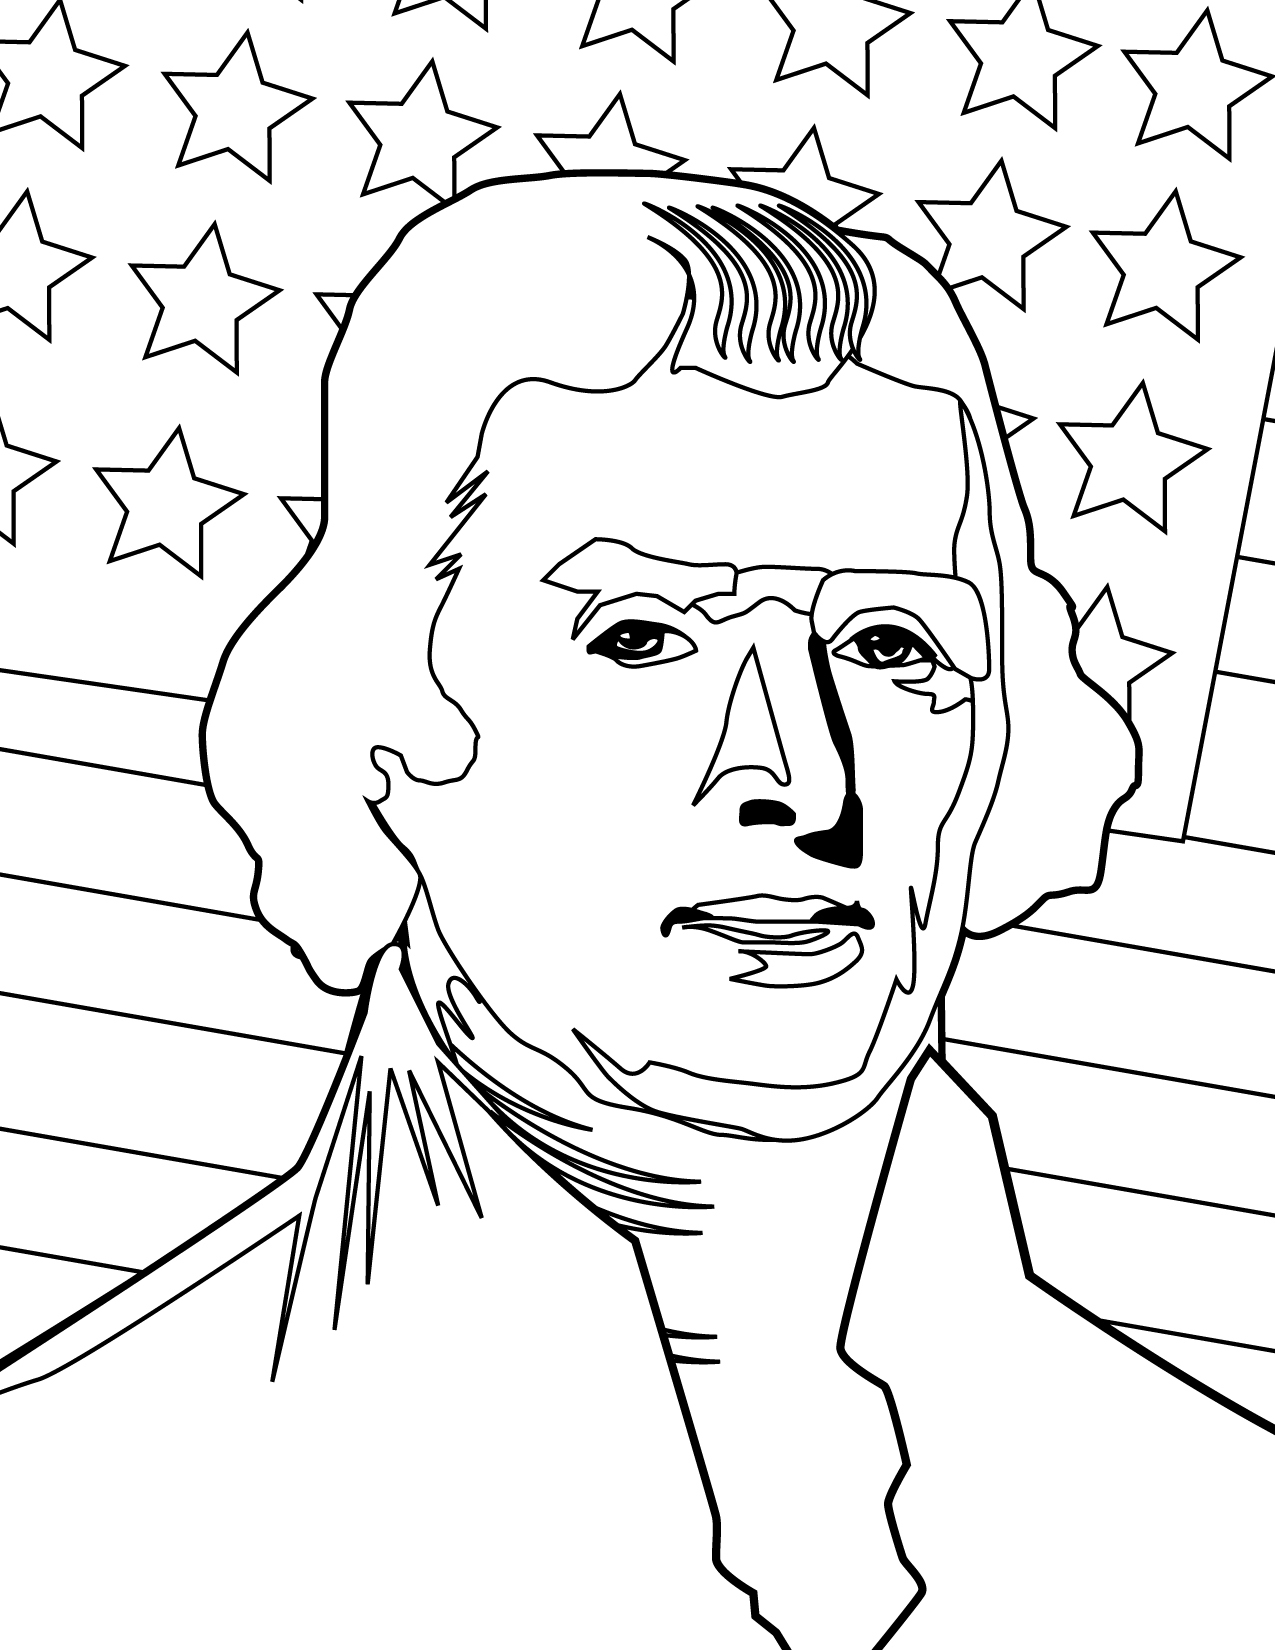 Thomas Jefferson Coloring Page at GetColorings.com | Free printable ...